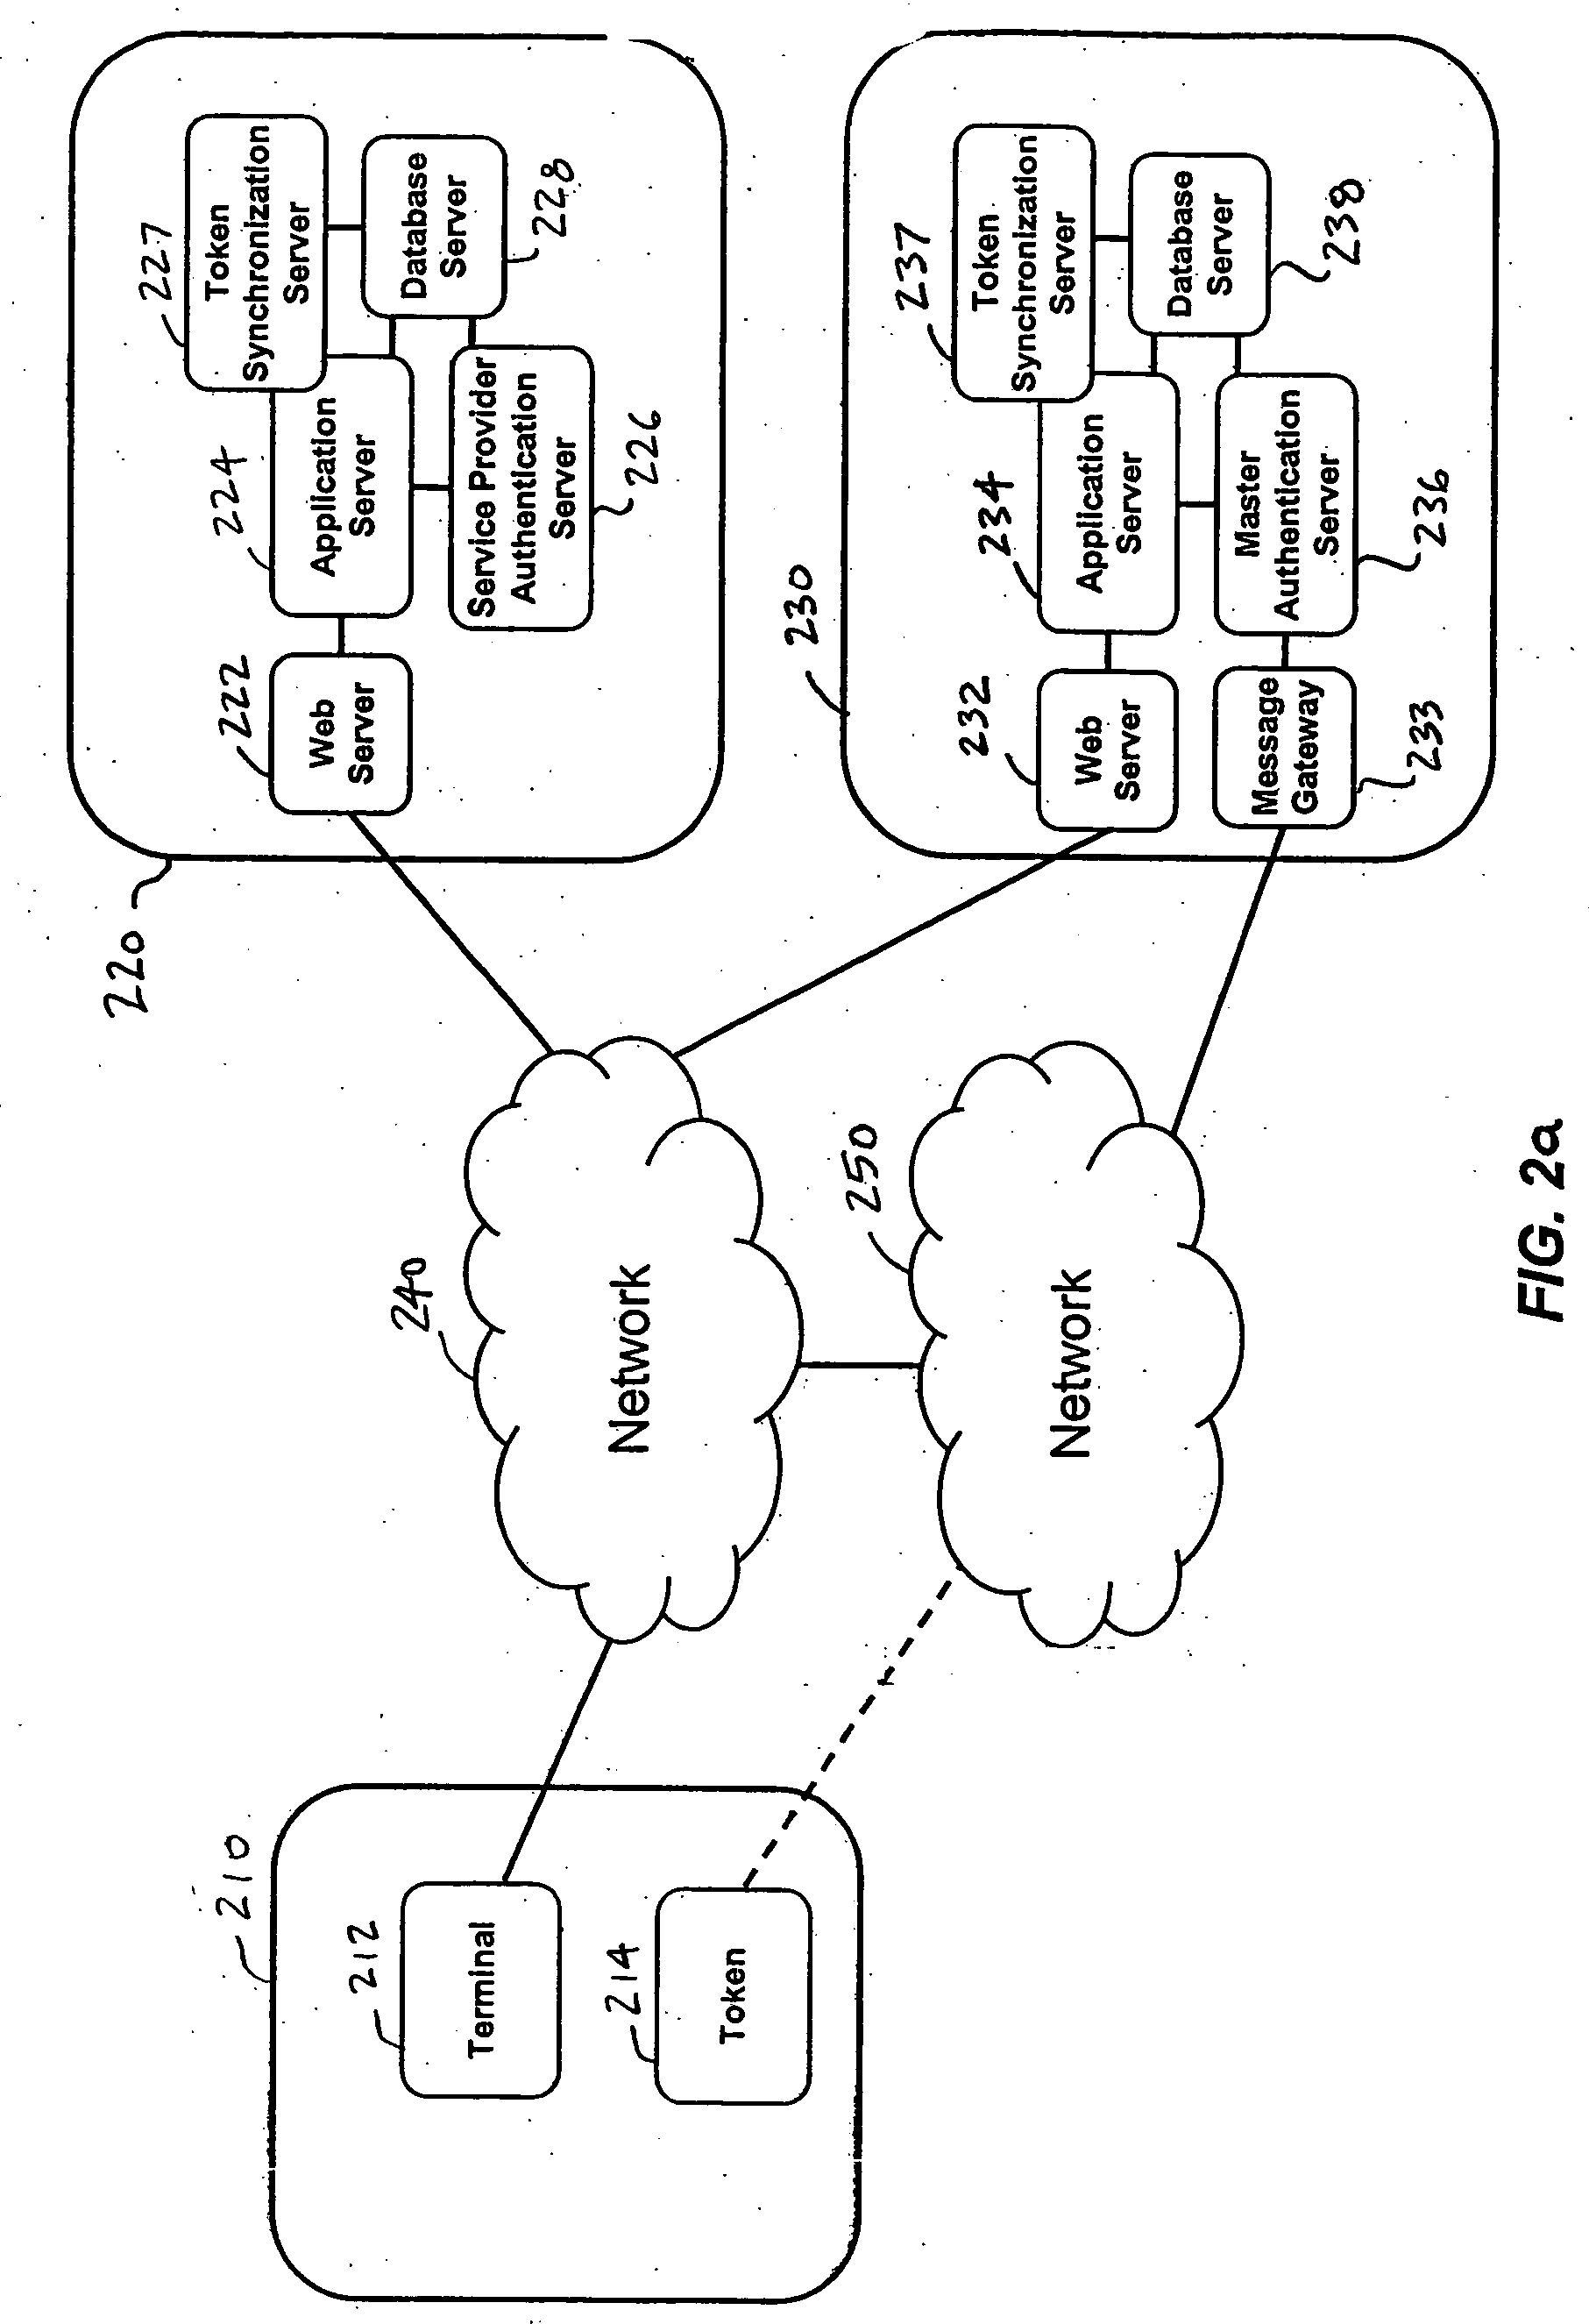 Single one-time password token with single PIN for access to multiple providers